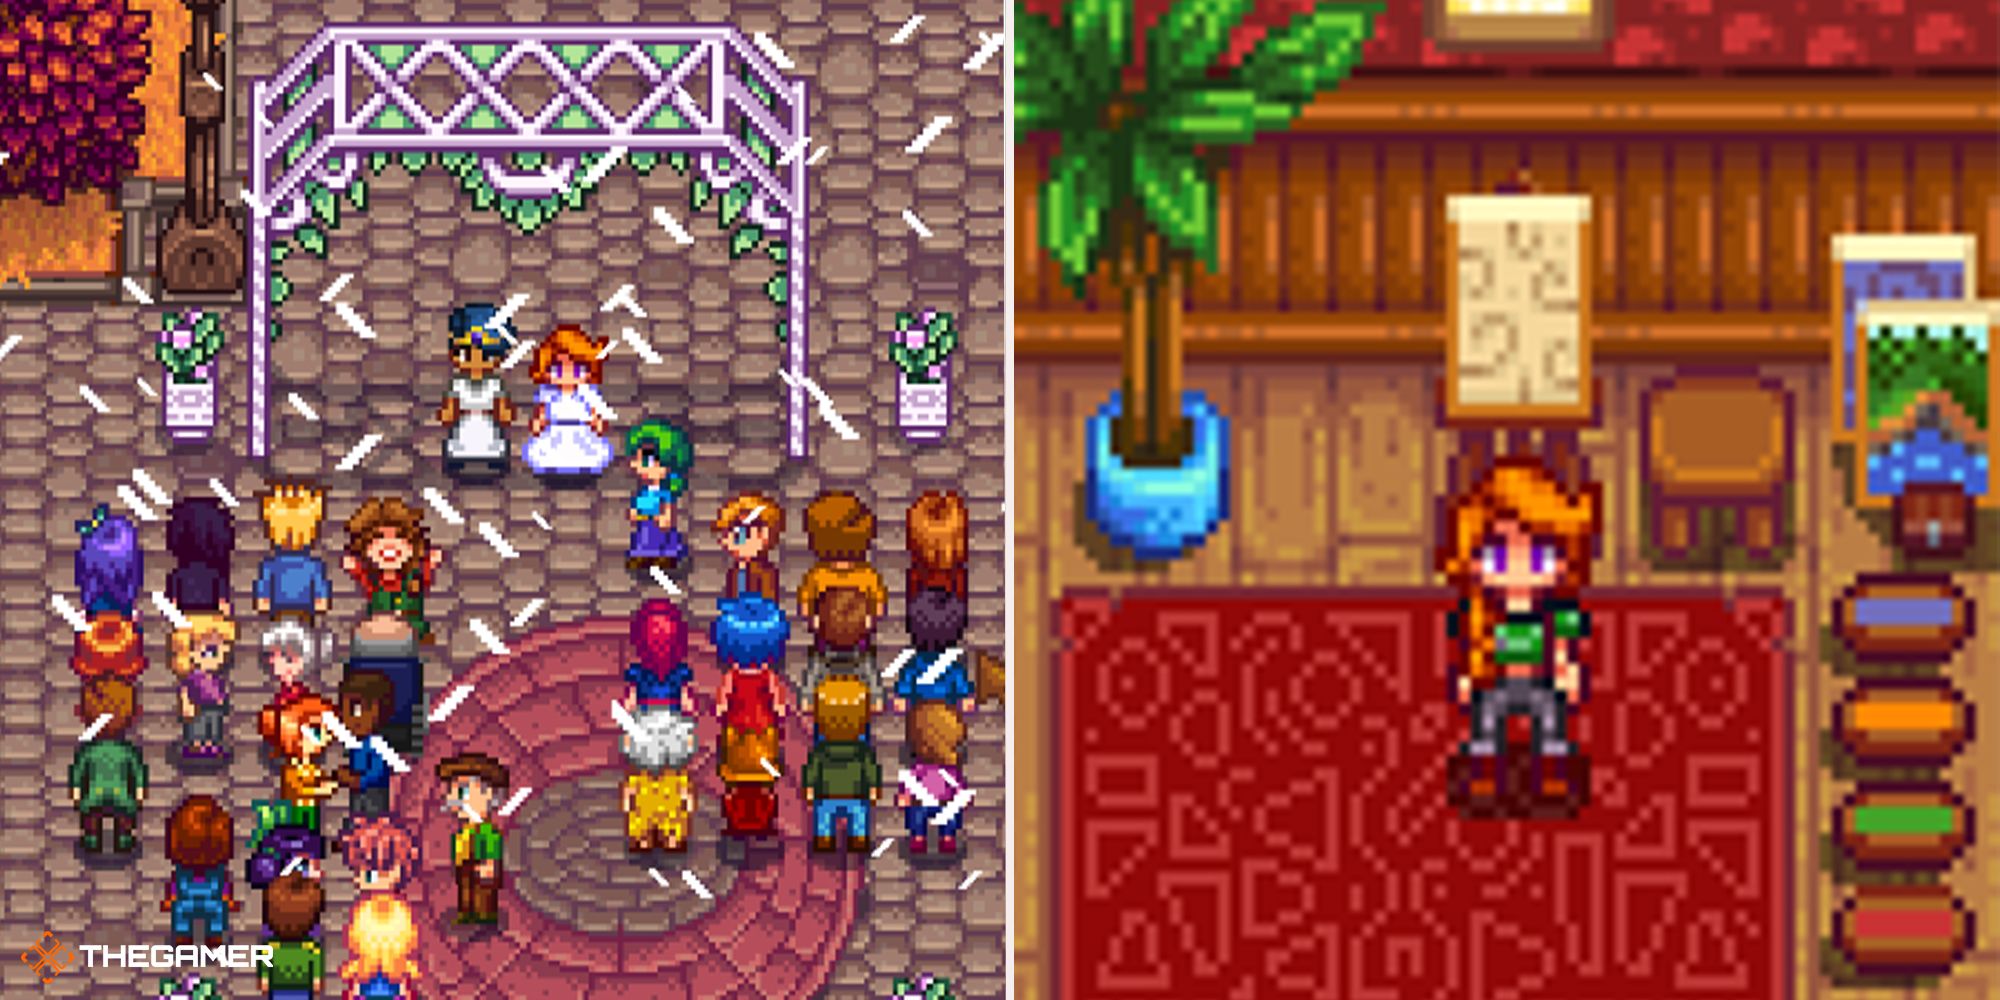 Stardew Valley - leah wedding (left), leah spouse room (right)